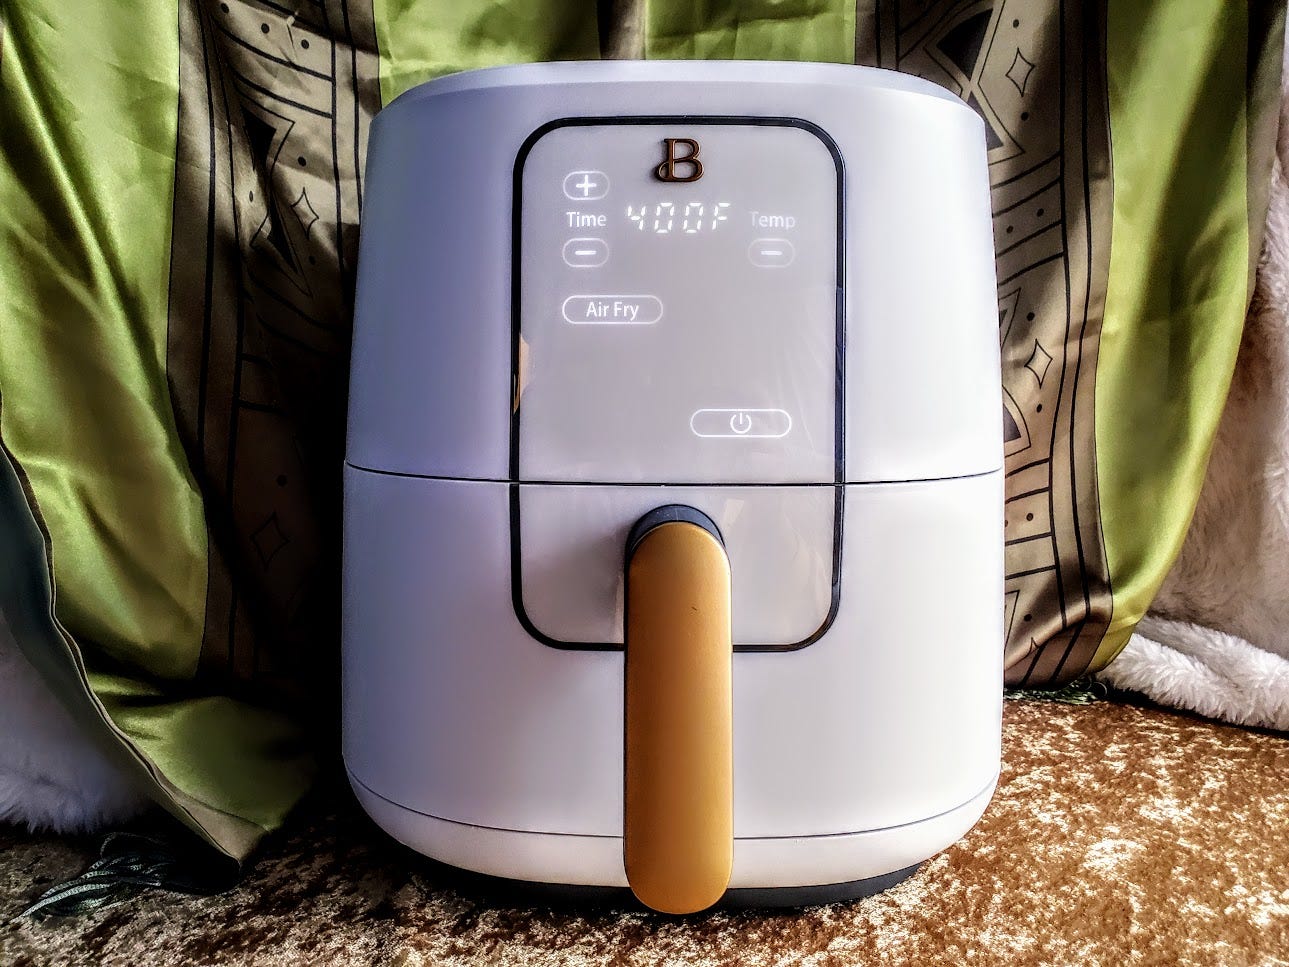 The Beautiful 6 Quart Touchscreen Air Fryer by Drew Barrymore is displayed with a green and gold background.